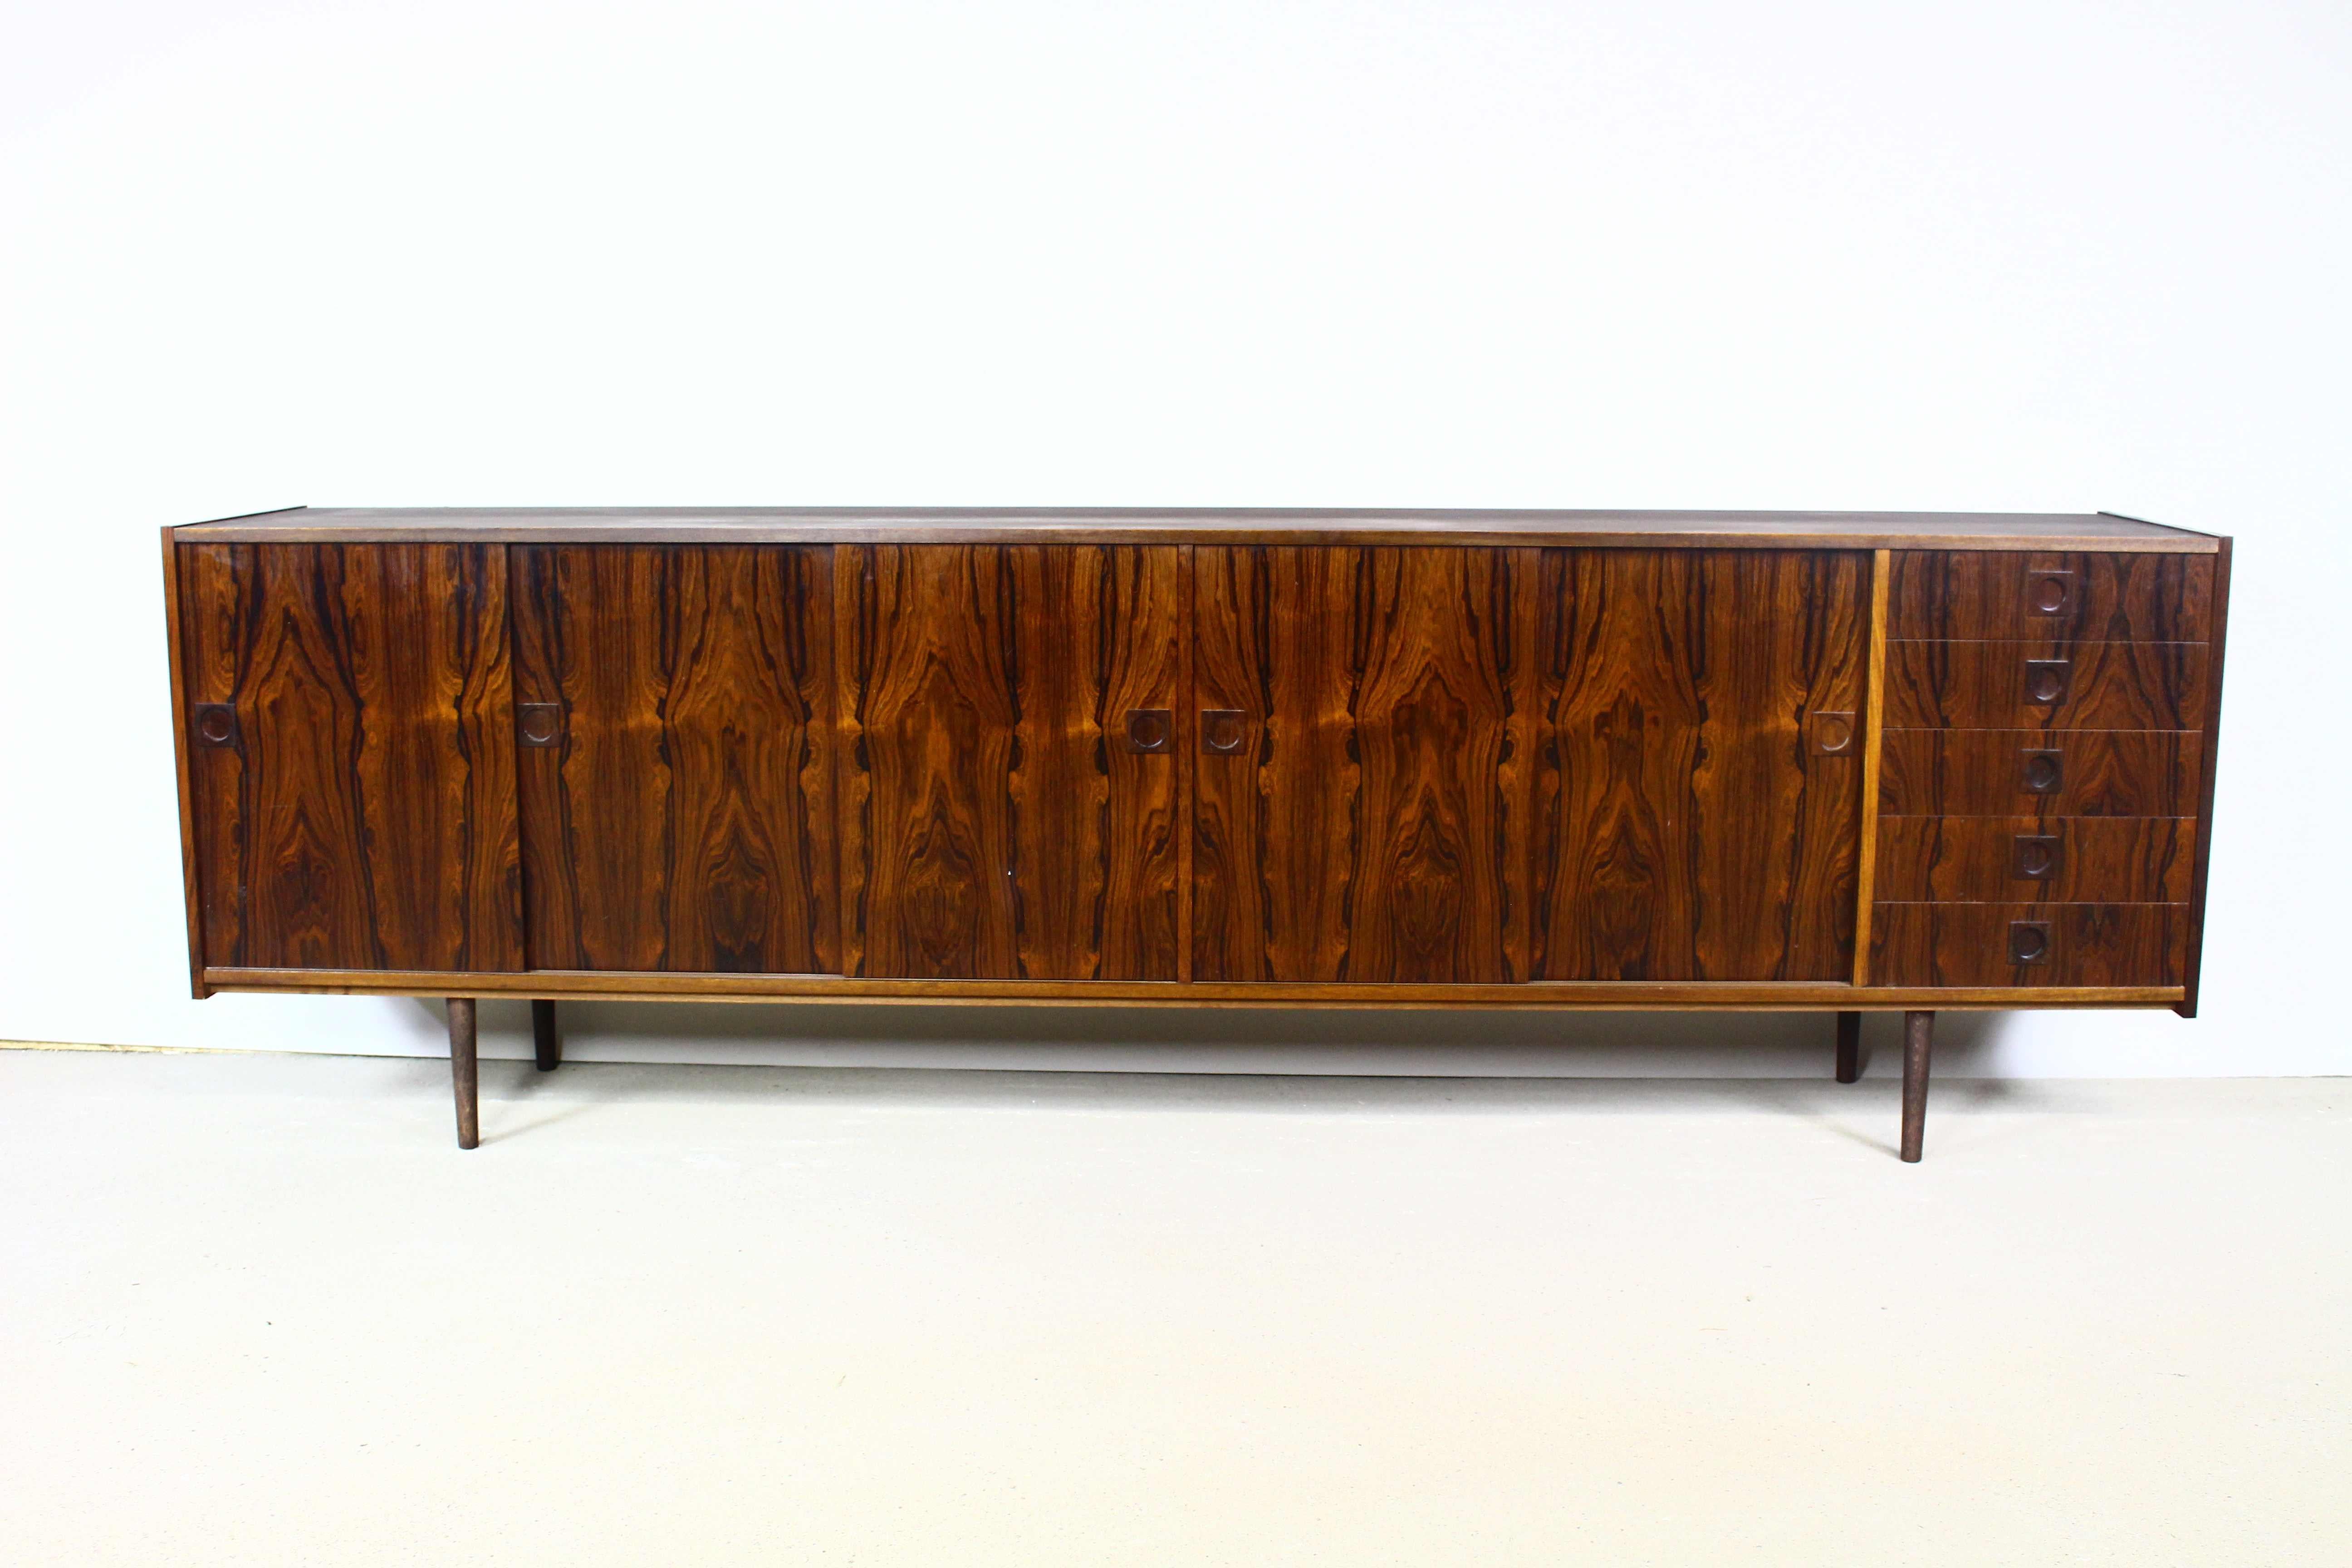 Danish rosewood sideboard from the 1960s.
The sideboard consists of five sliding doors, inside there are shelves, on the right there are five drawers.
The sideboard has contoured solid handles and beautiful graining.
Height adjustable shelves.

Top